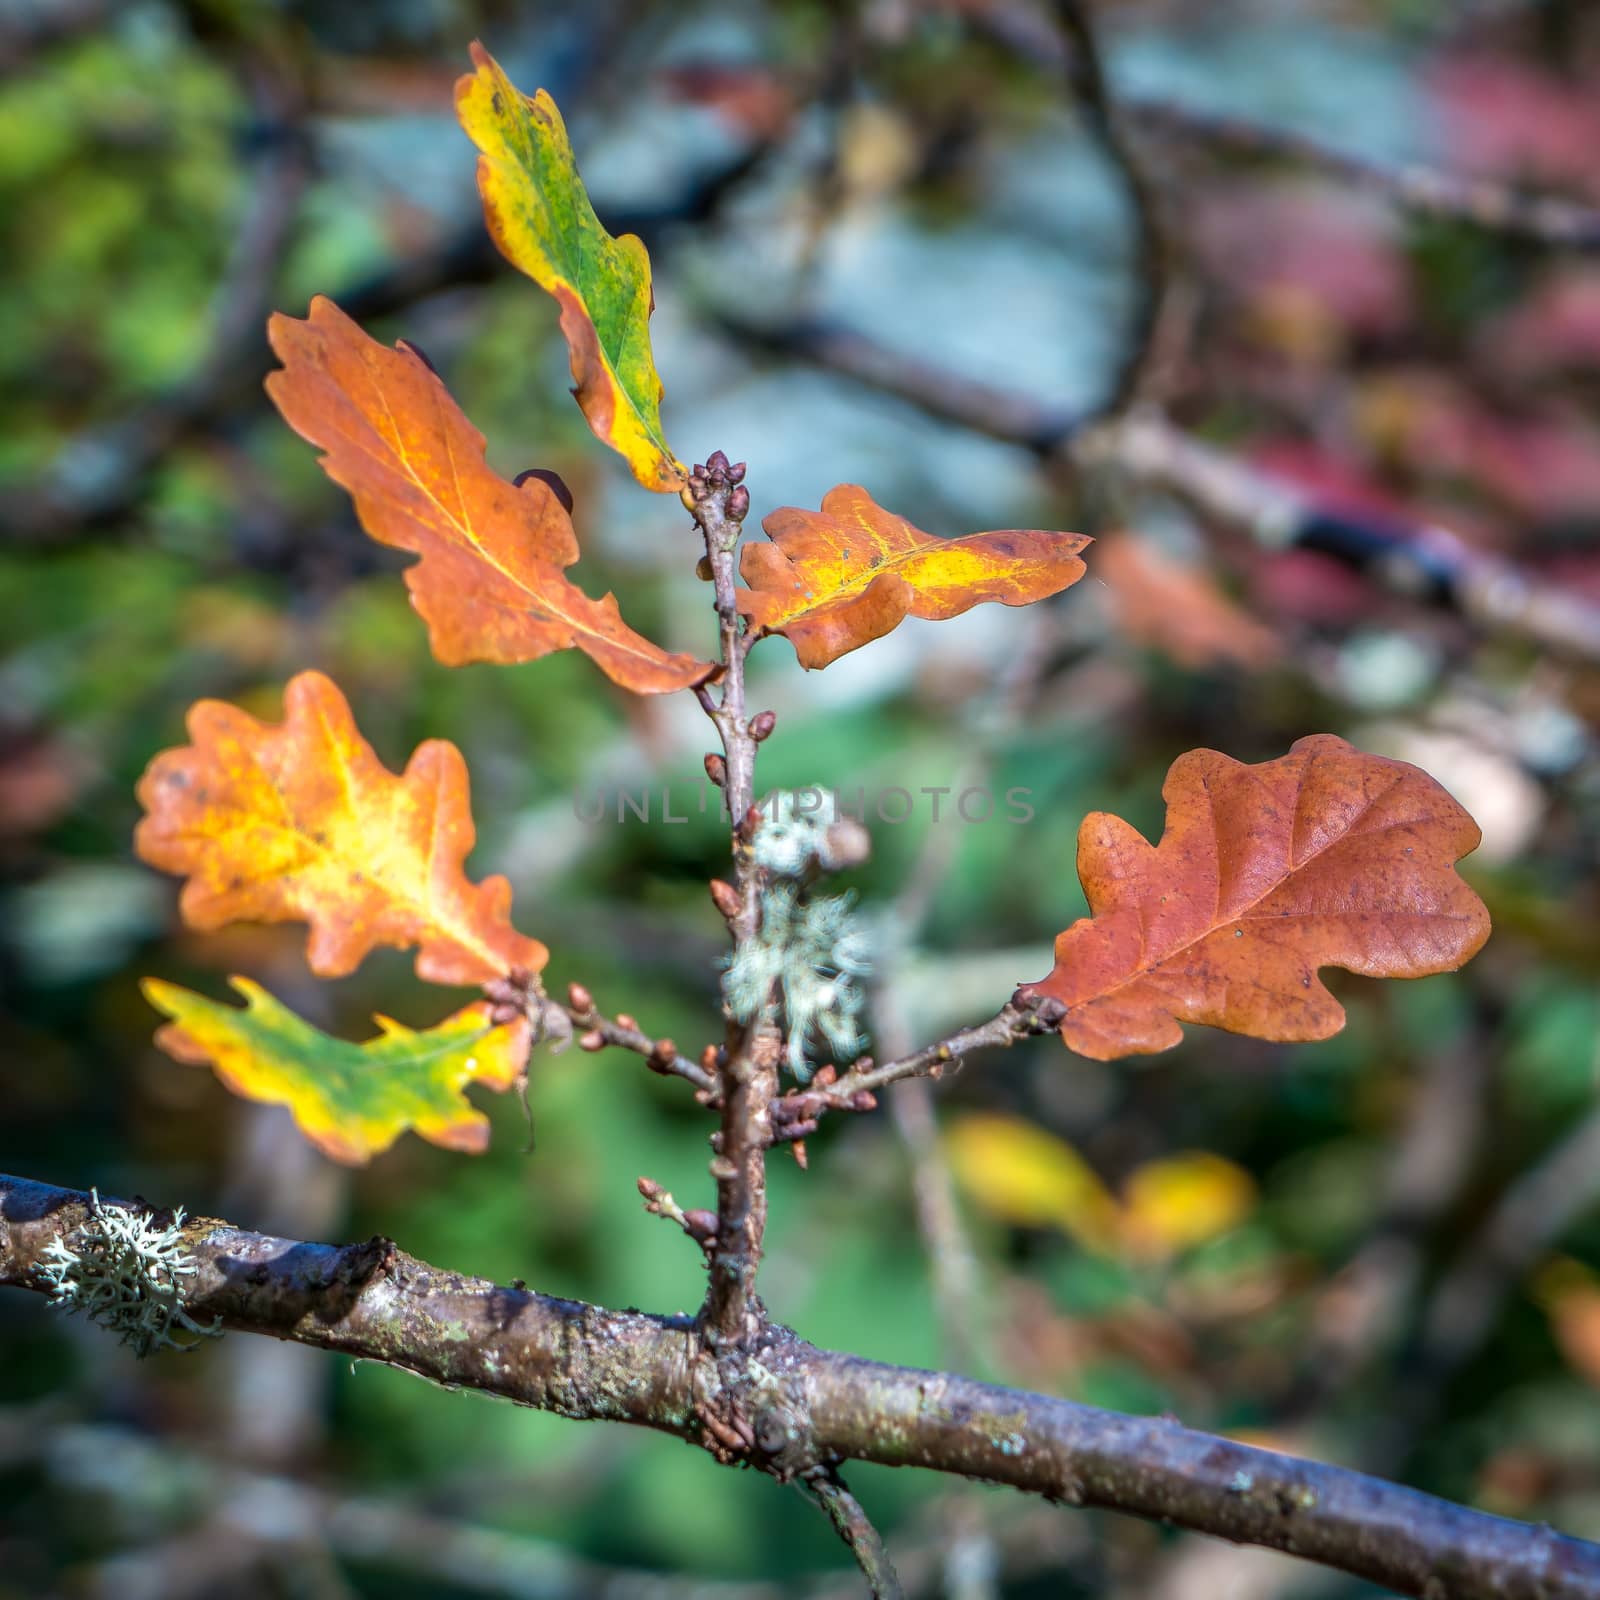 Oak Leaves Decaying on a Tree in Autumn by phil_bird